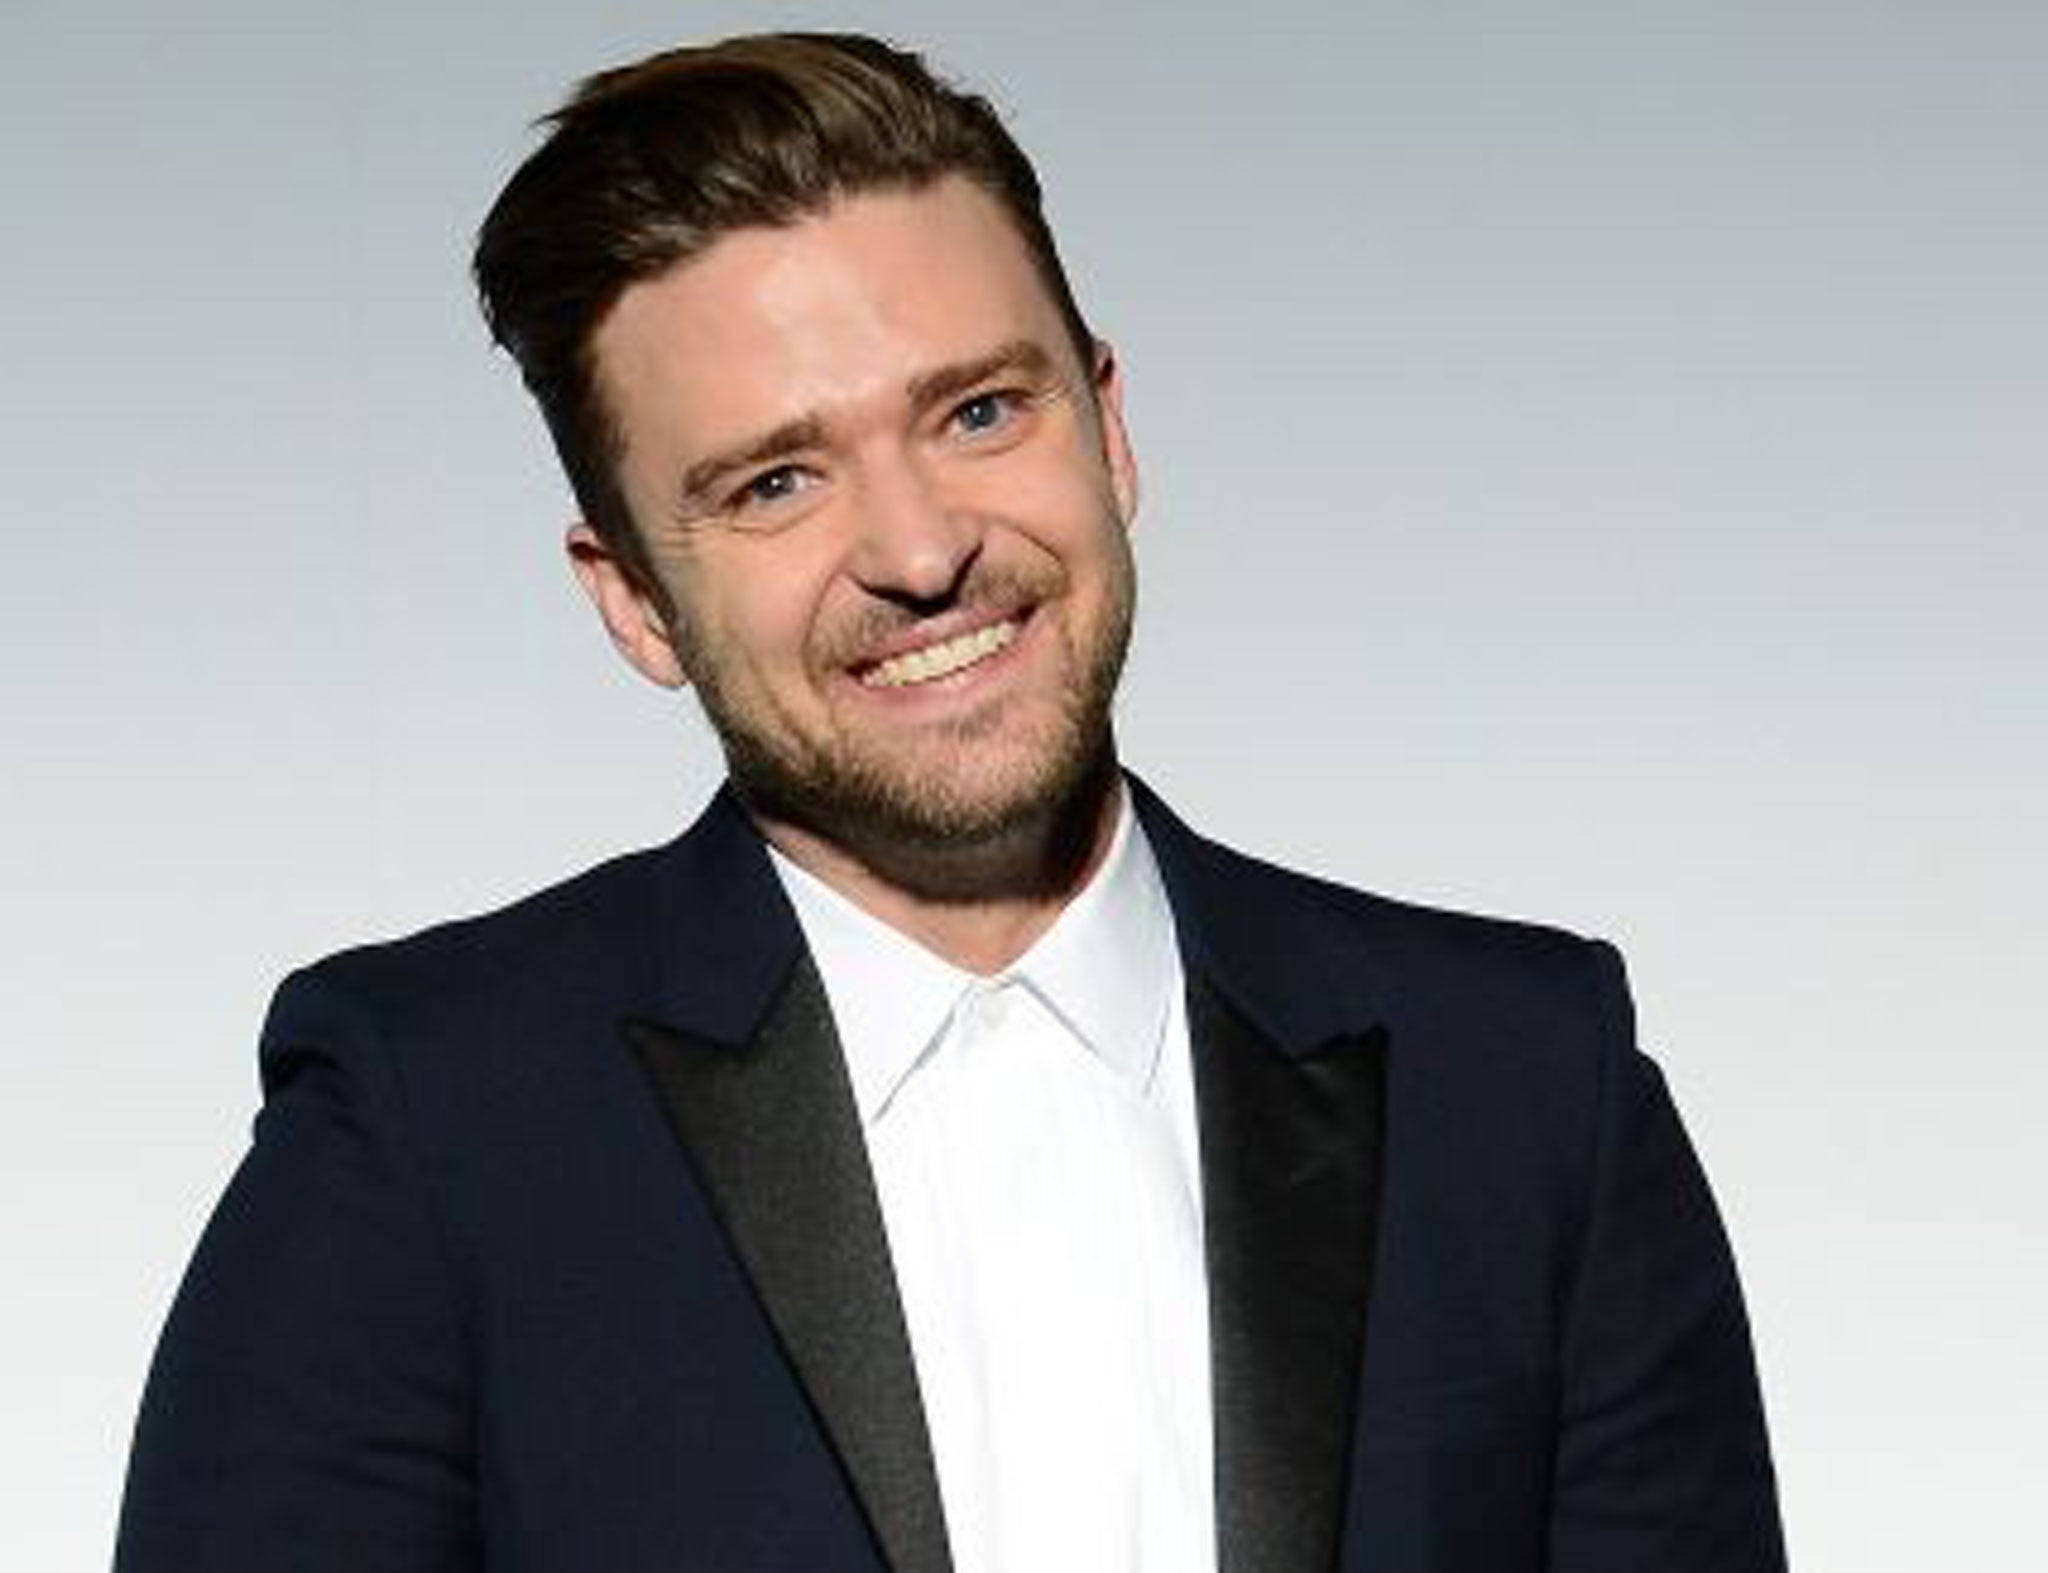 Justin Timberlake is determined to be taken seriously as an actor